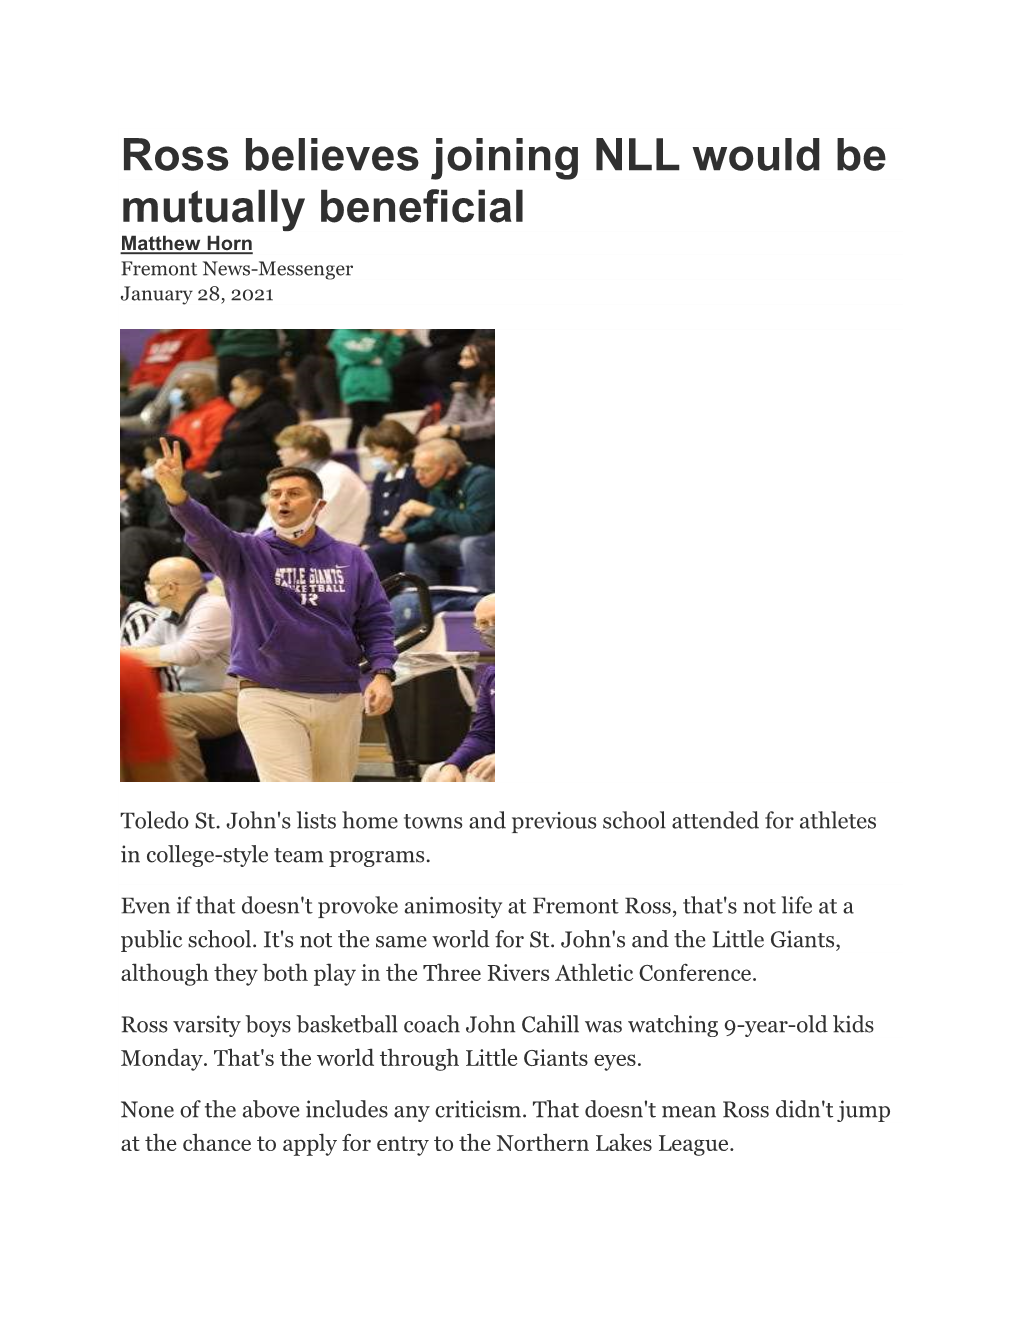 Ross Believes Joining NLL Would Be Mutually Beneficial January 28, 2021